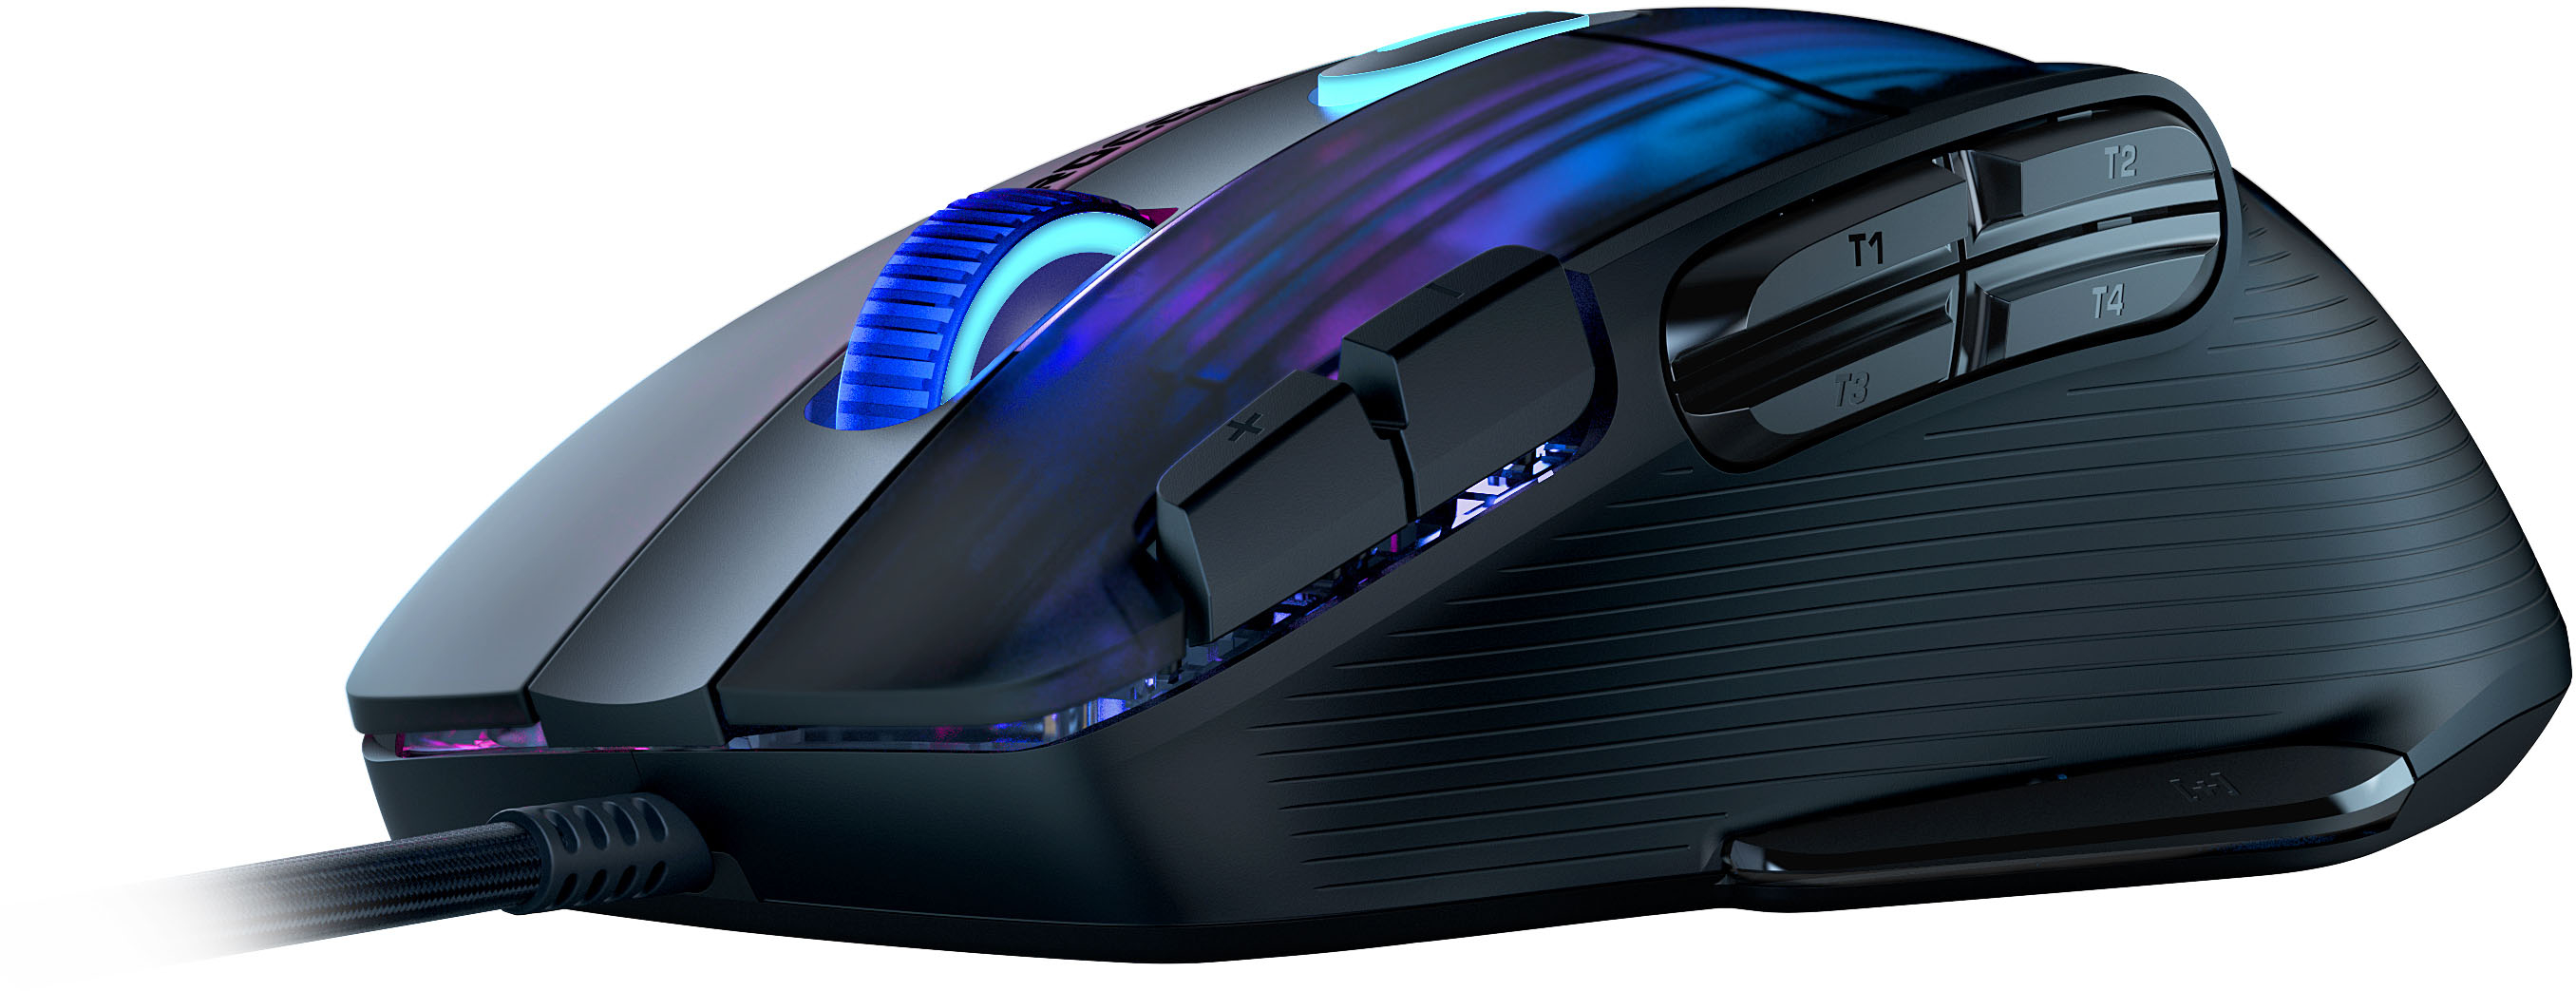 design lighting XP Buy Optical Best Ambidextrous Wired Kone ROC-11-420-01 with RGB Black AIMO multi-button - Gaming ROCCAT Mouse &